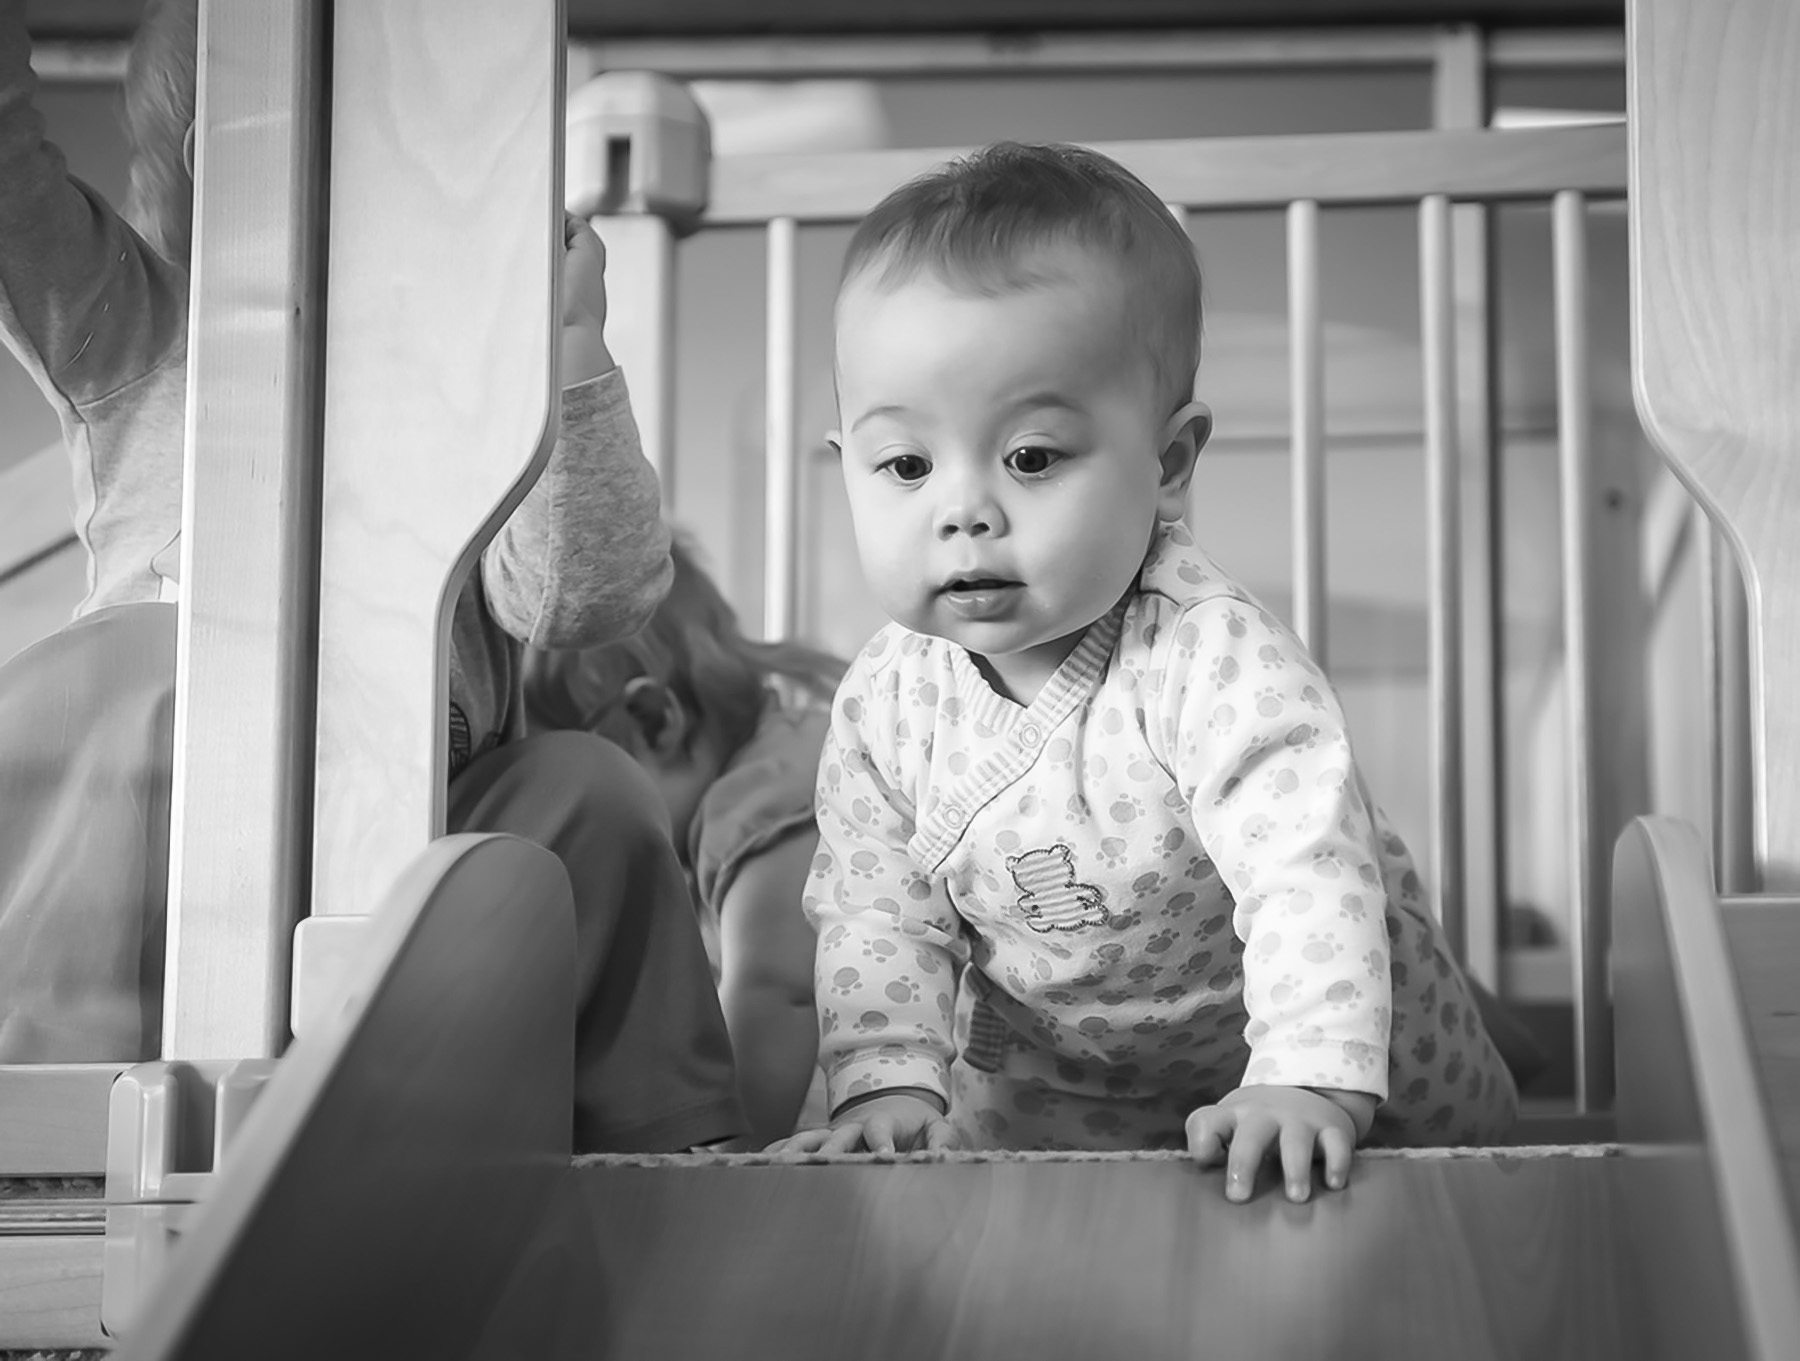 Black and white image of a baby at the top of a slide